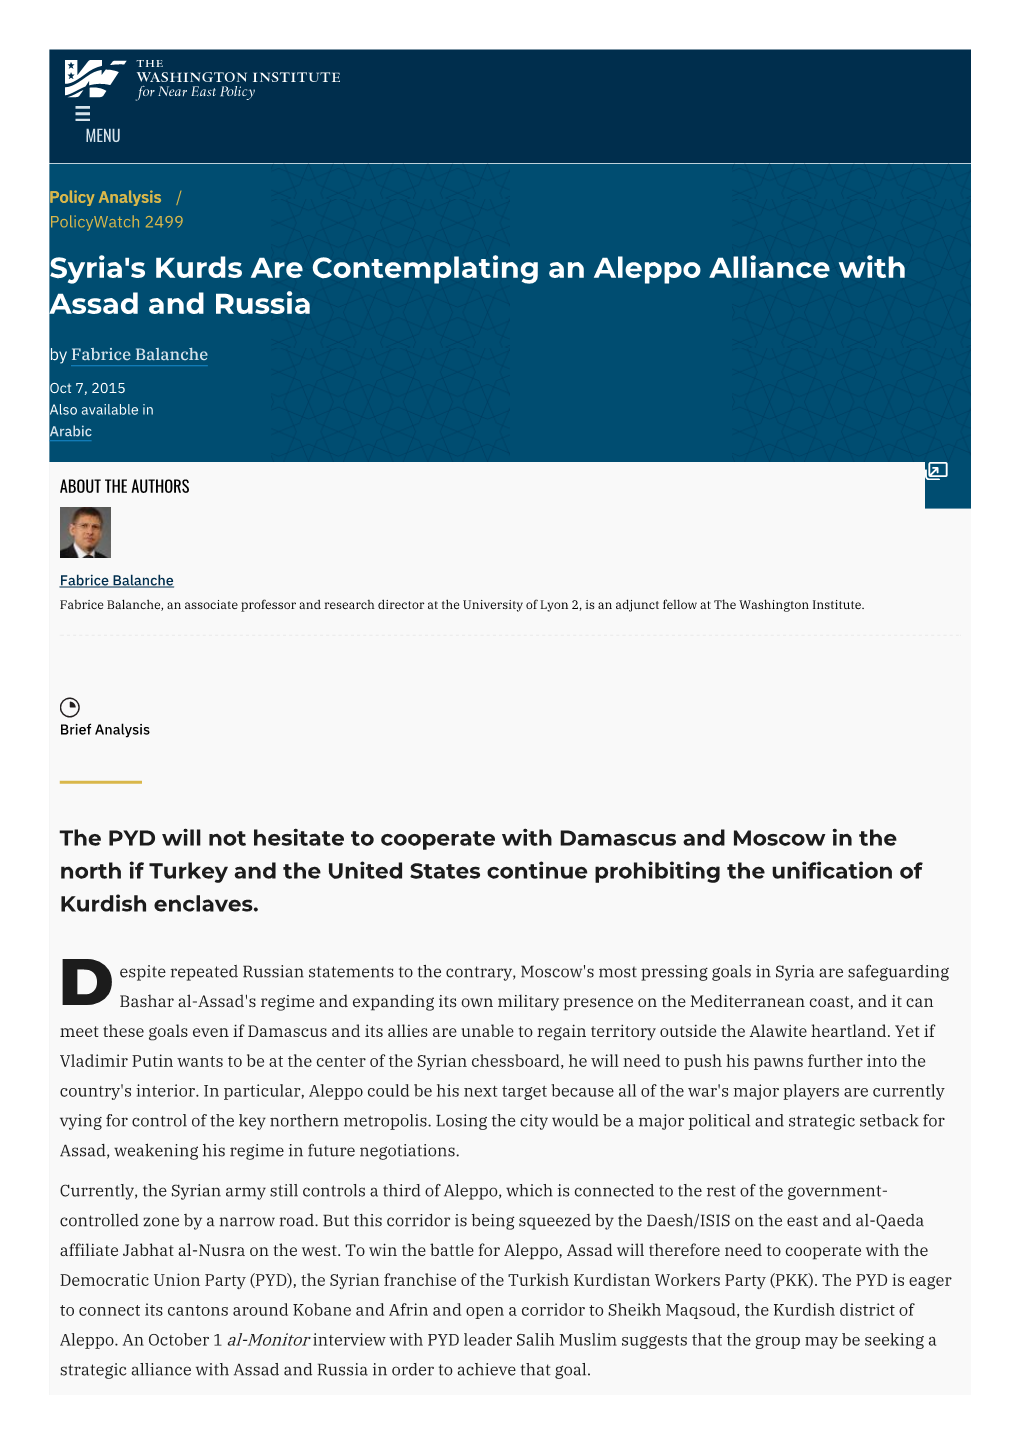 Syria's Kurds Are Contemplating an Aleppo Alliance with Assad and Russia by Fabrice Balanche